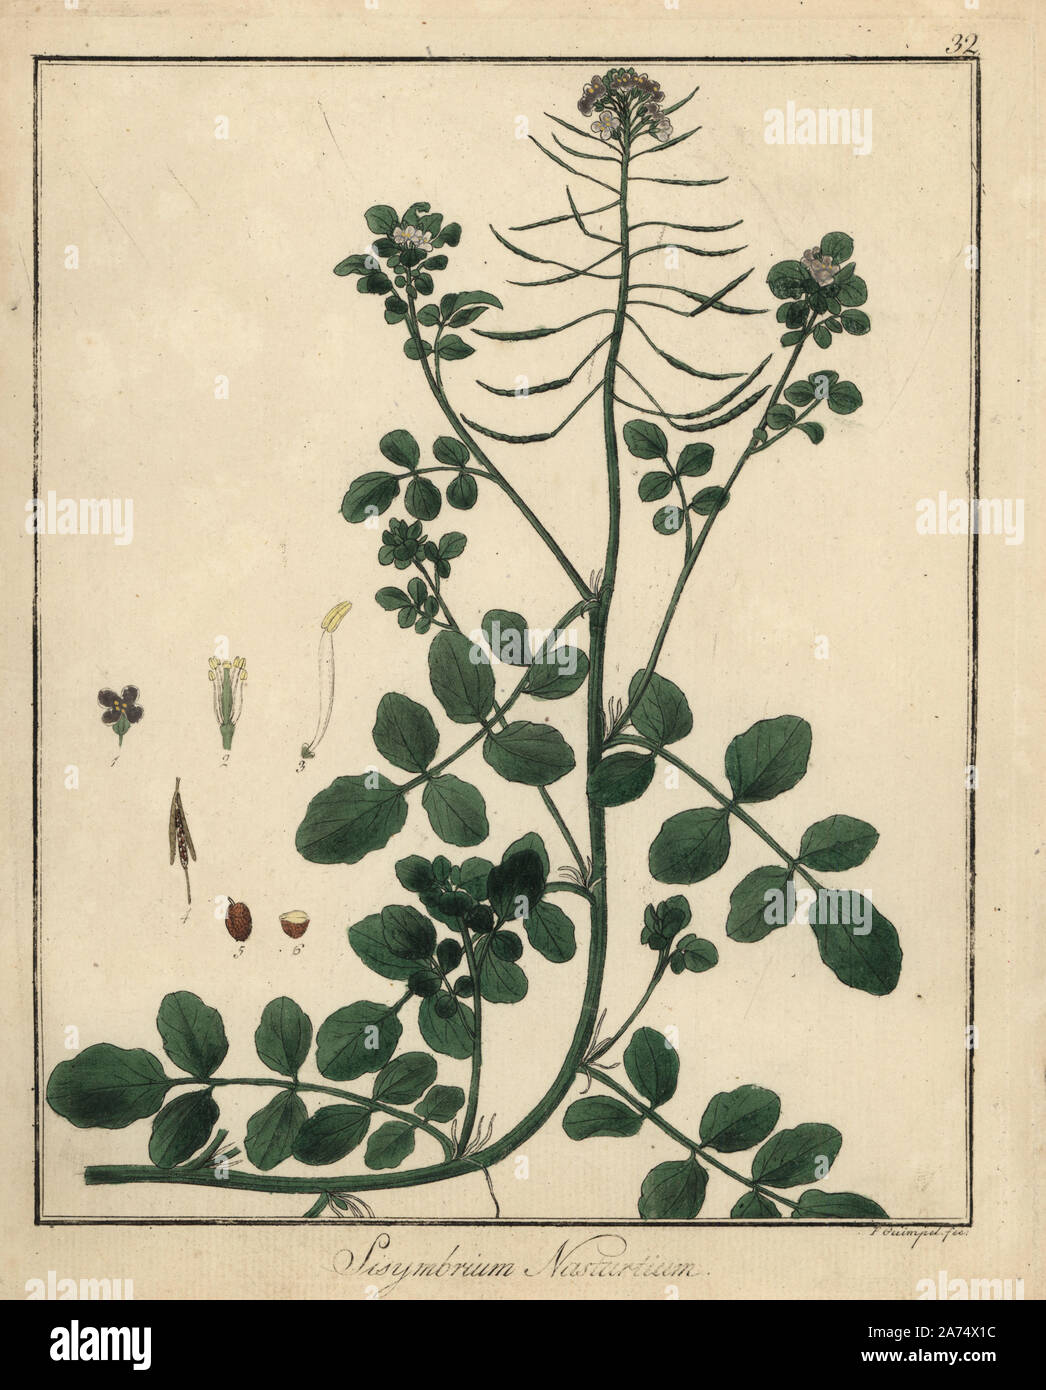 Watercress, Nasturtium officinale. Handcoloured copperplate engraving by F. Guimpel from Dr. Friedrich Gottlob Hayne's Medical Botany, Berlin, 1822. Hayne (1763-1832) was a German botanist, apothecary and professor of pharmaceutical botany at Berlin University. Stock Photo